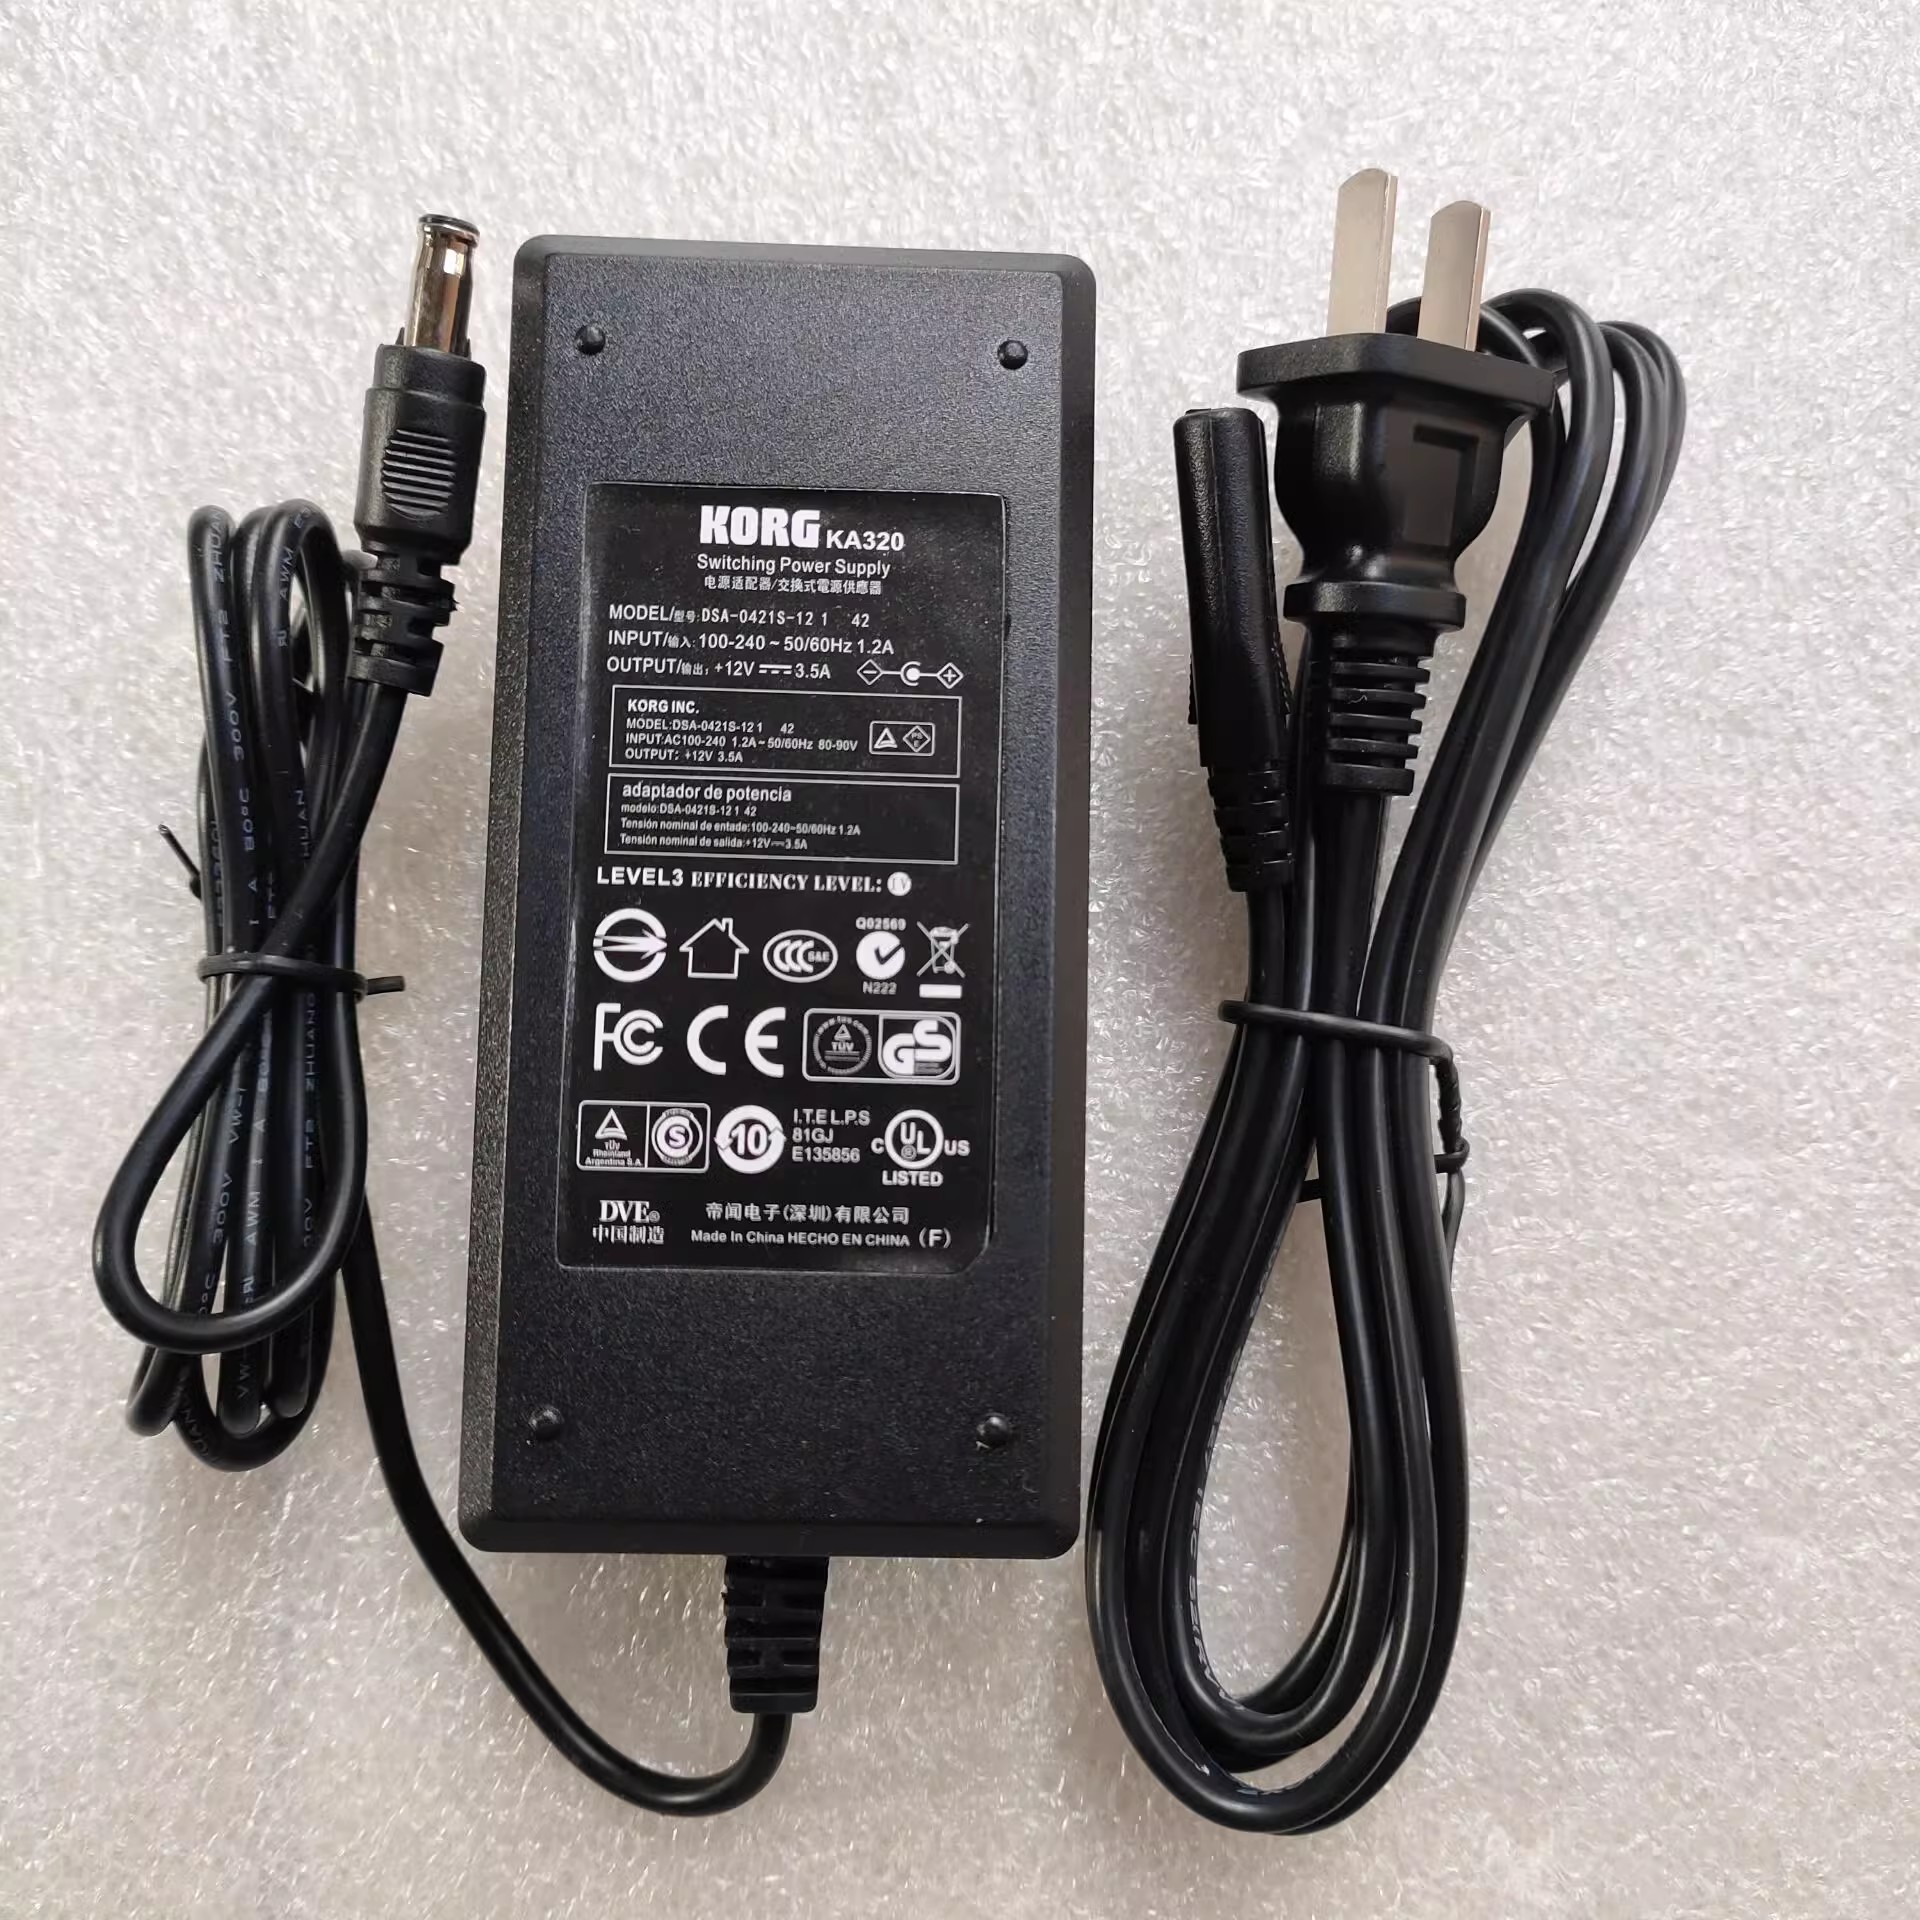 *Brand NEW* KORG FJ-SW20171903420D KA320 DVE DSA-0421S-12 12V 3.5A AC DC ADAPTHE POWER Supply - Click Image to Close